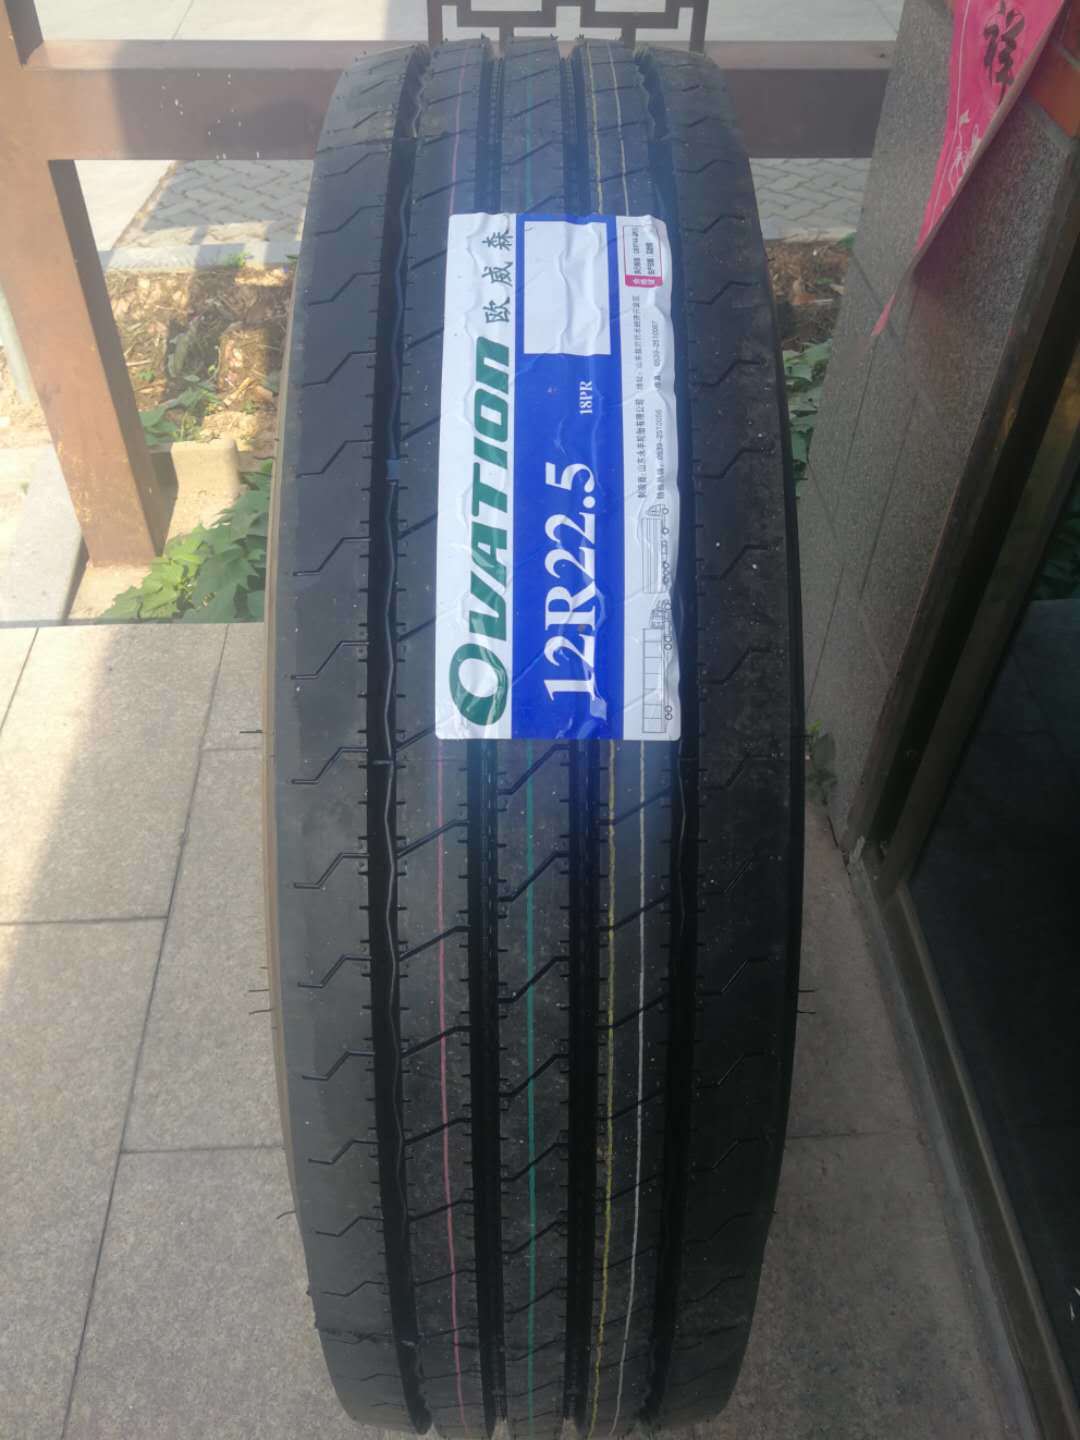 295/75 22.5 11r22.5 285/75r24.5 11r24.5 315/80r22.5 Truck Tires Steer Drive Trailer Position Hot Sale in Southeast Asia Markets